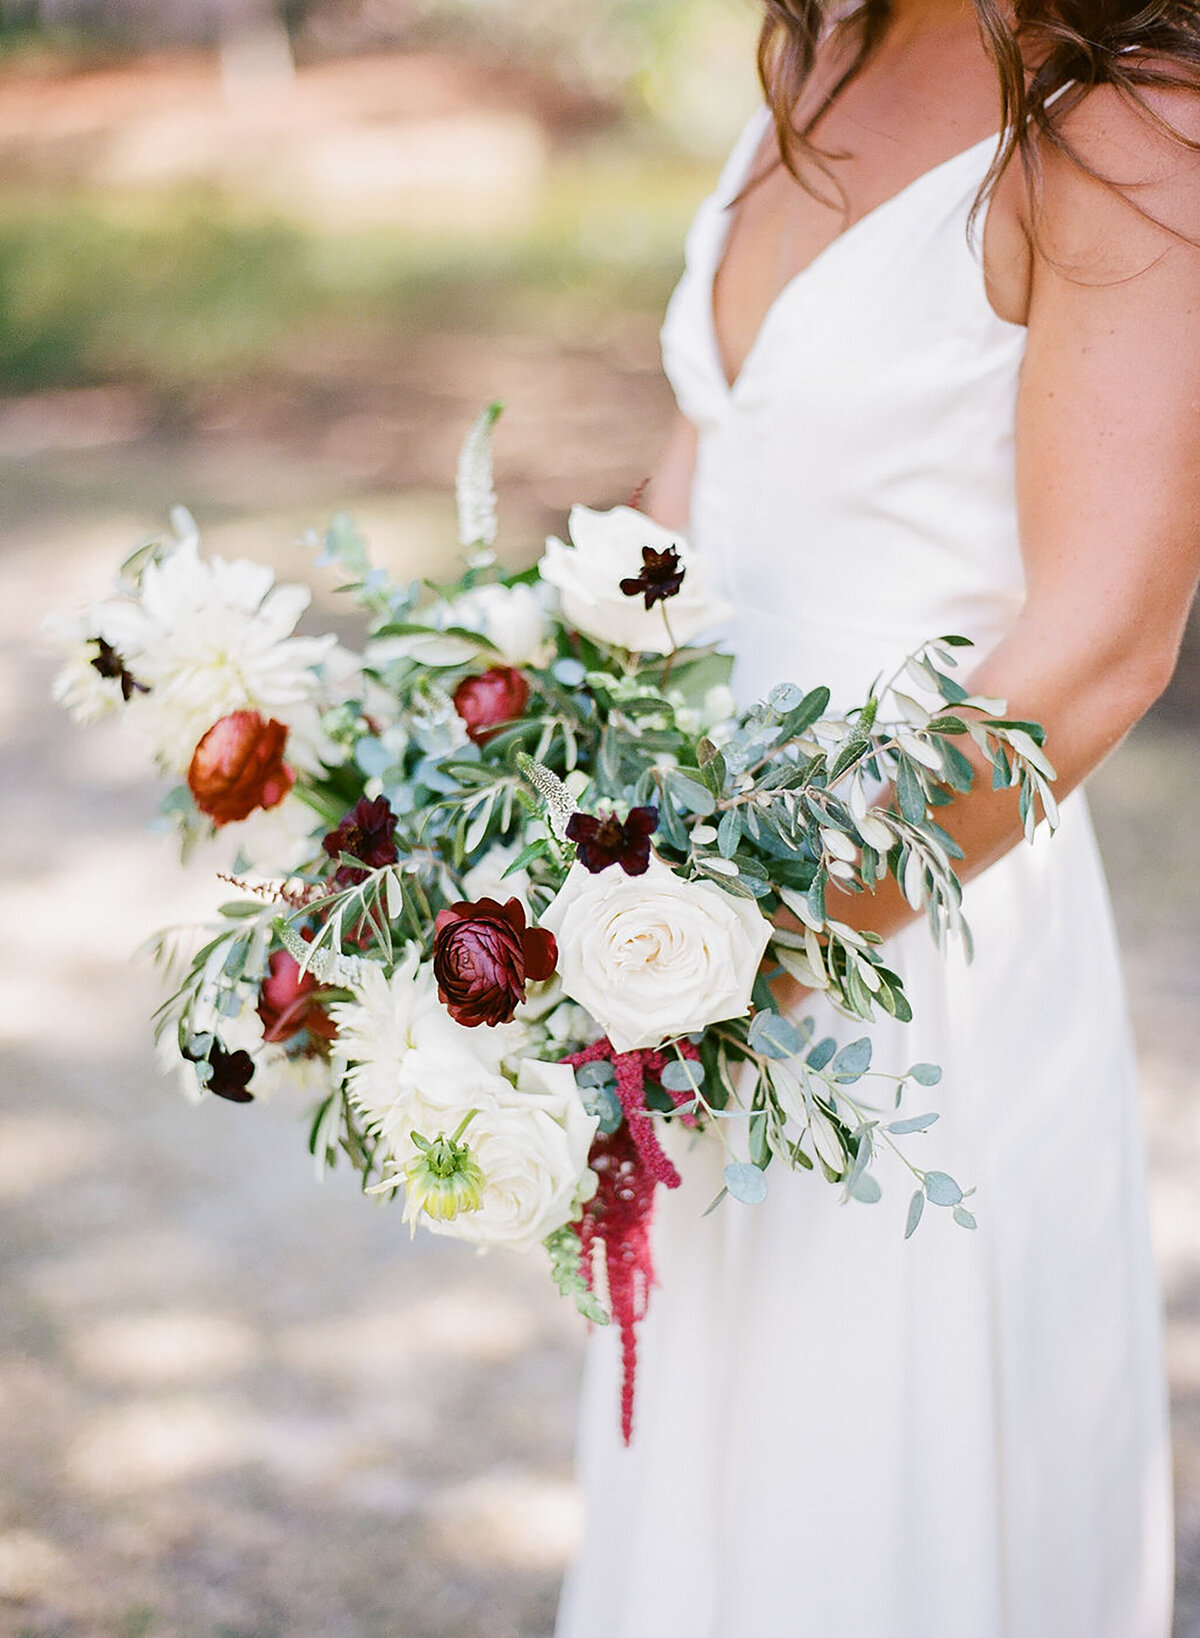 Emma + Christian | Wedding at Mingo Point by Pure Luxe Bride: Charleston Wedding and Event Planners